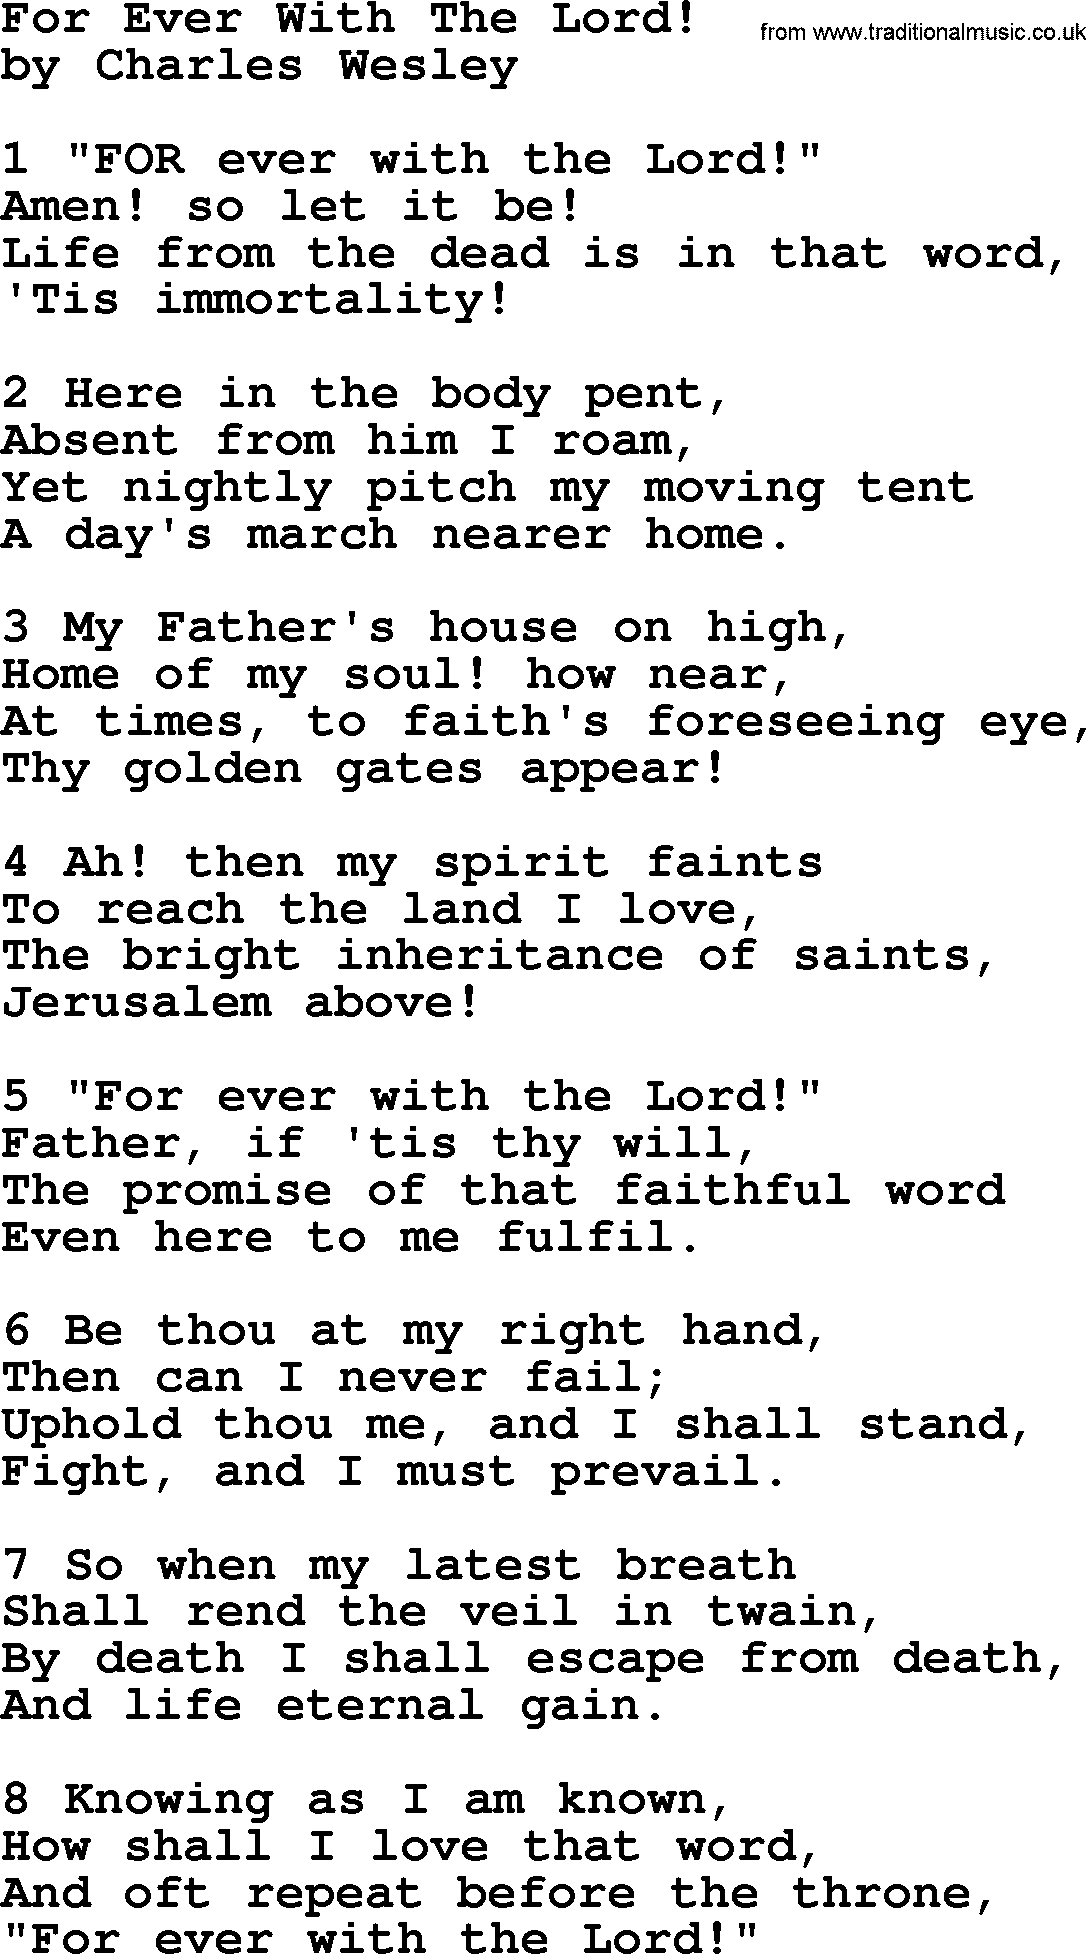 Charles Wesley hymn: For Ever With The Lord!, lyrics